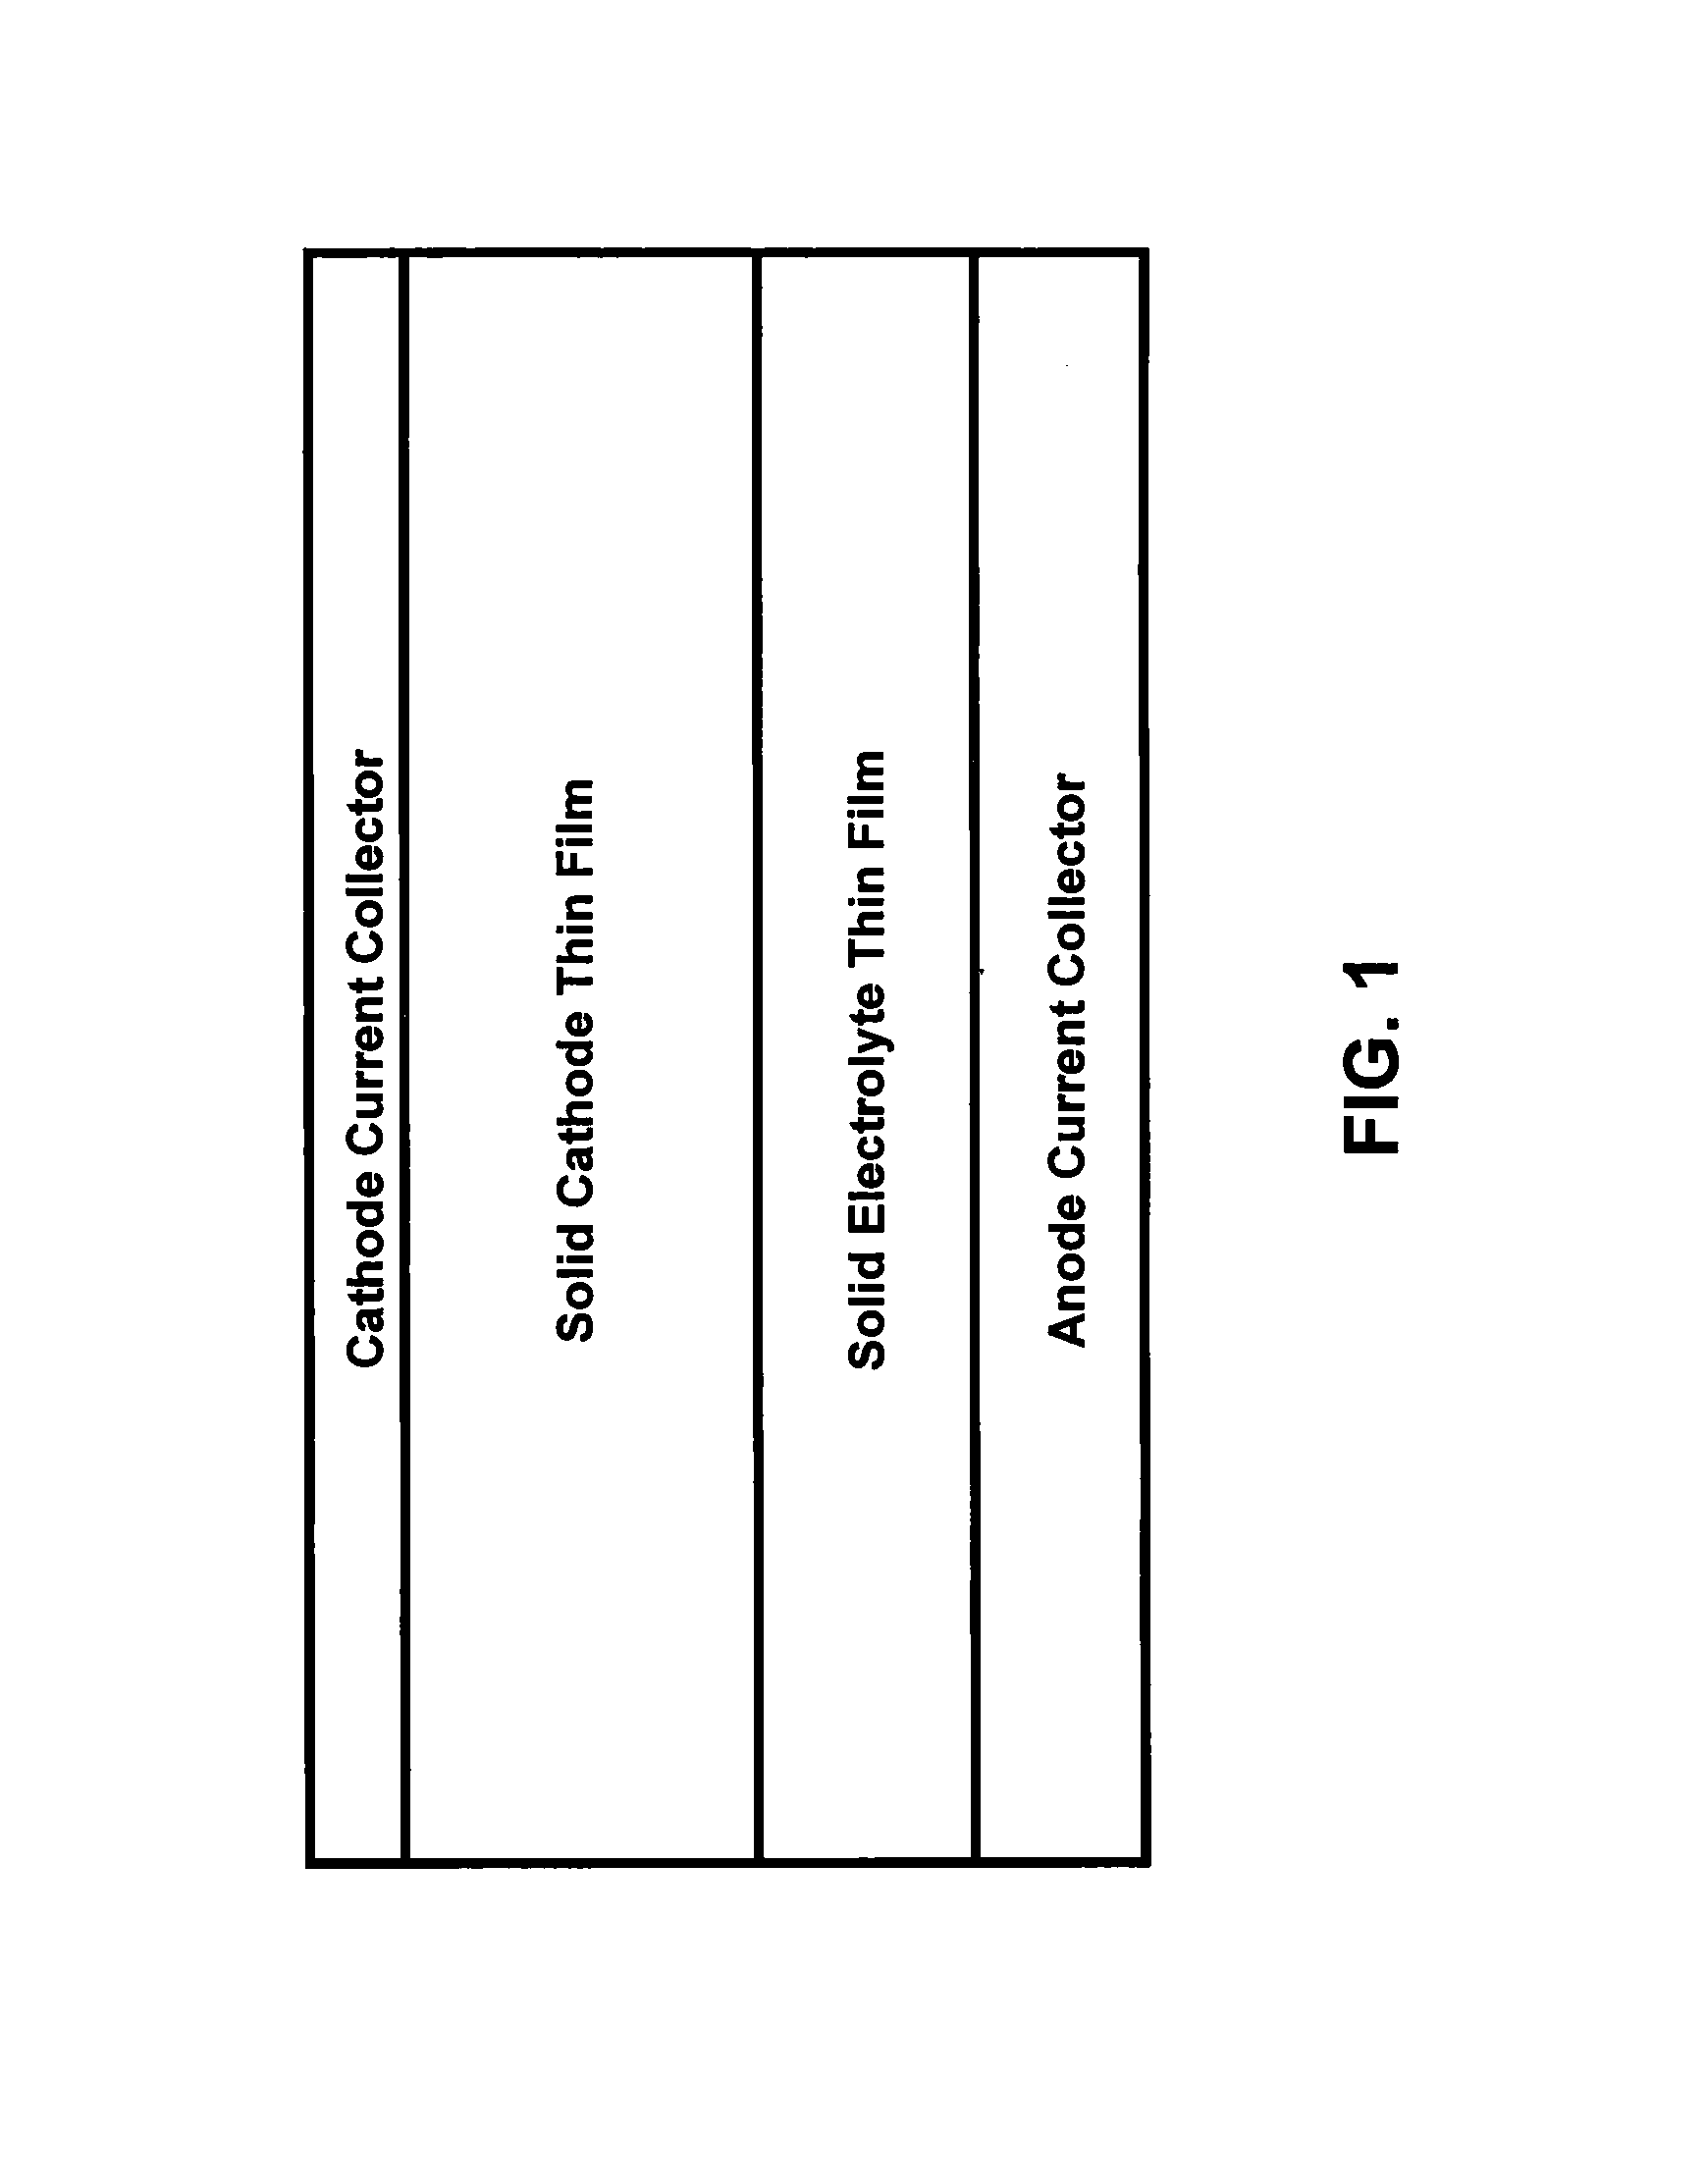 Solid-state lithium battery